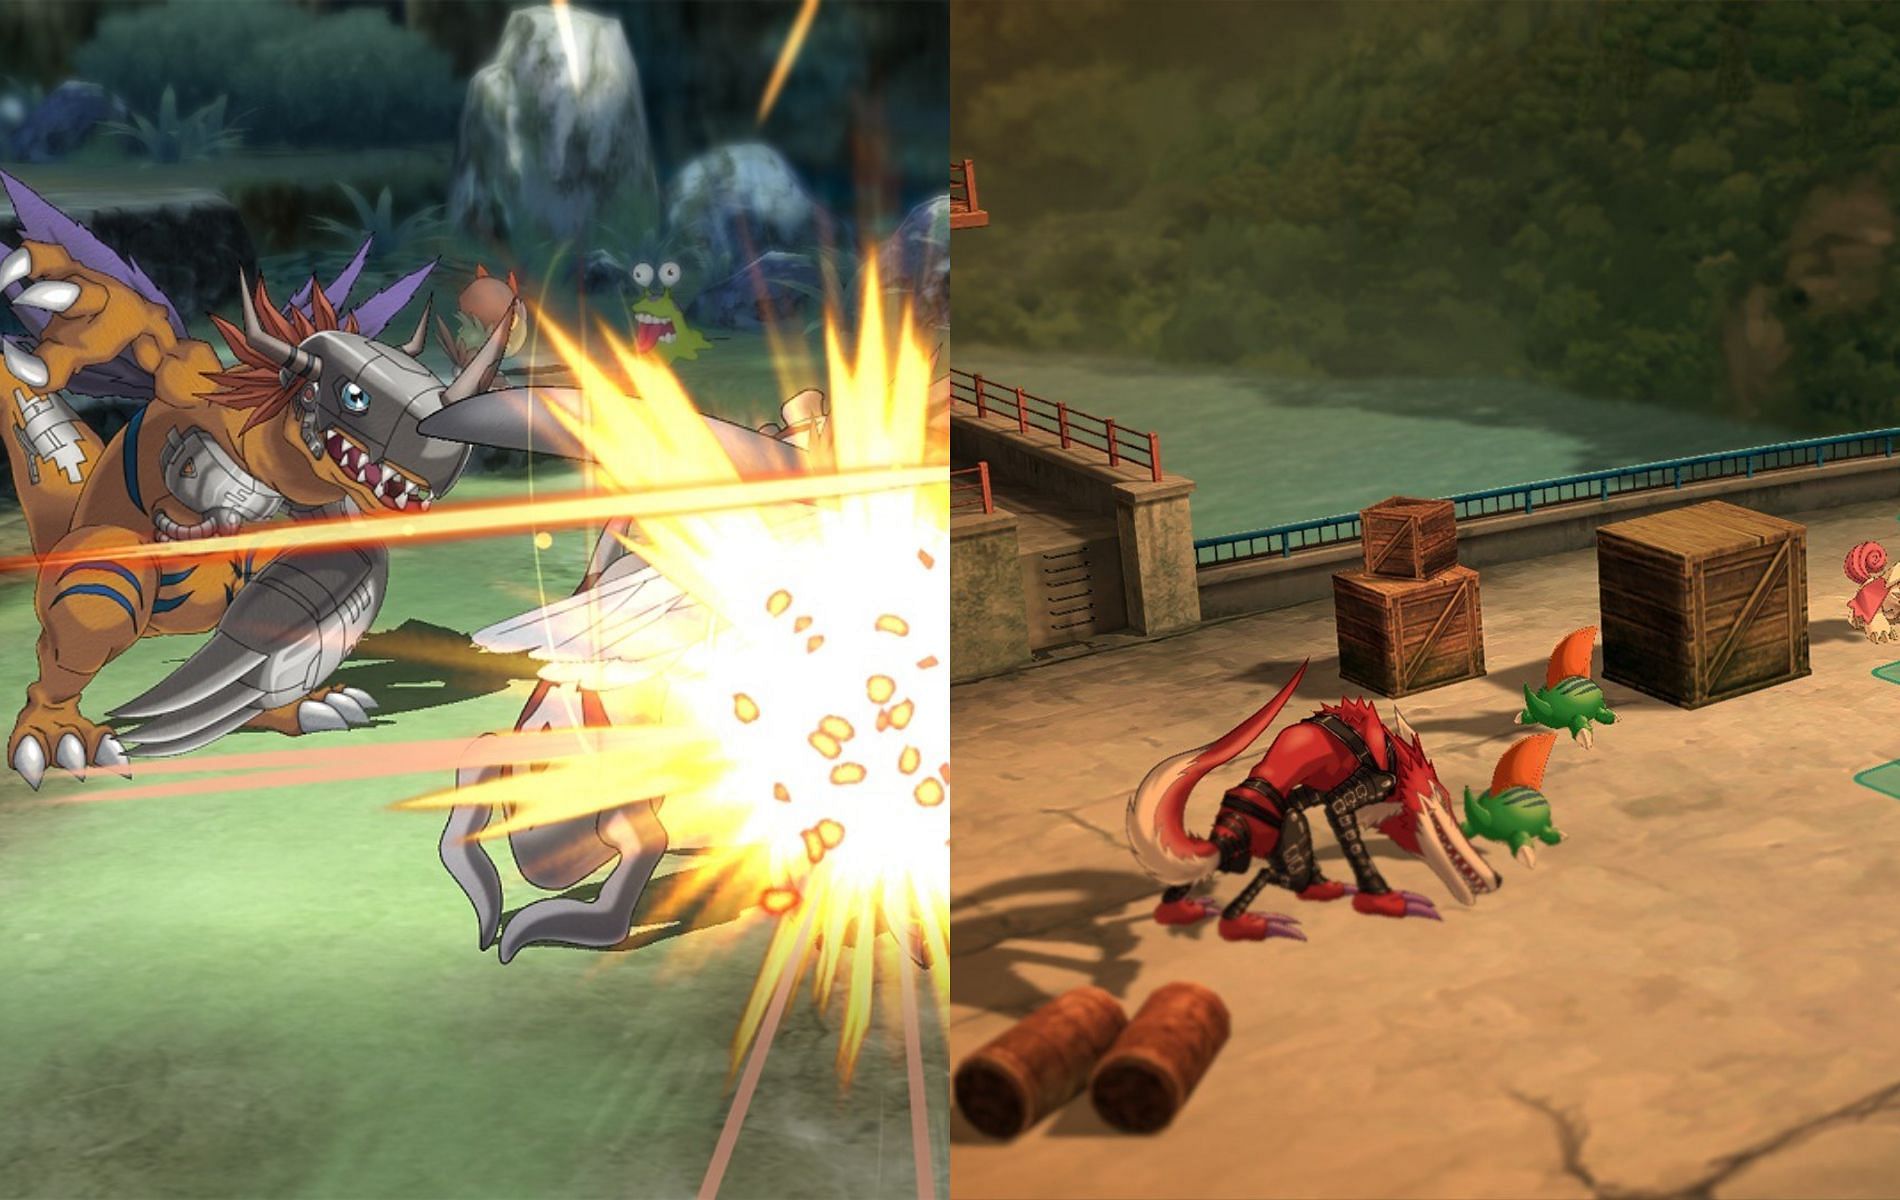 Fangmon is a boss encounter in Digimon Survive (Images via Bandai Namco)